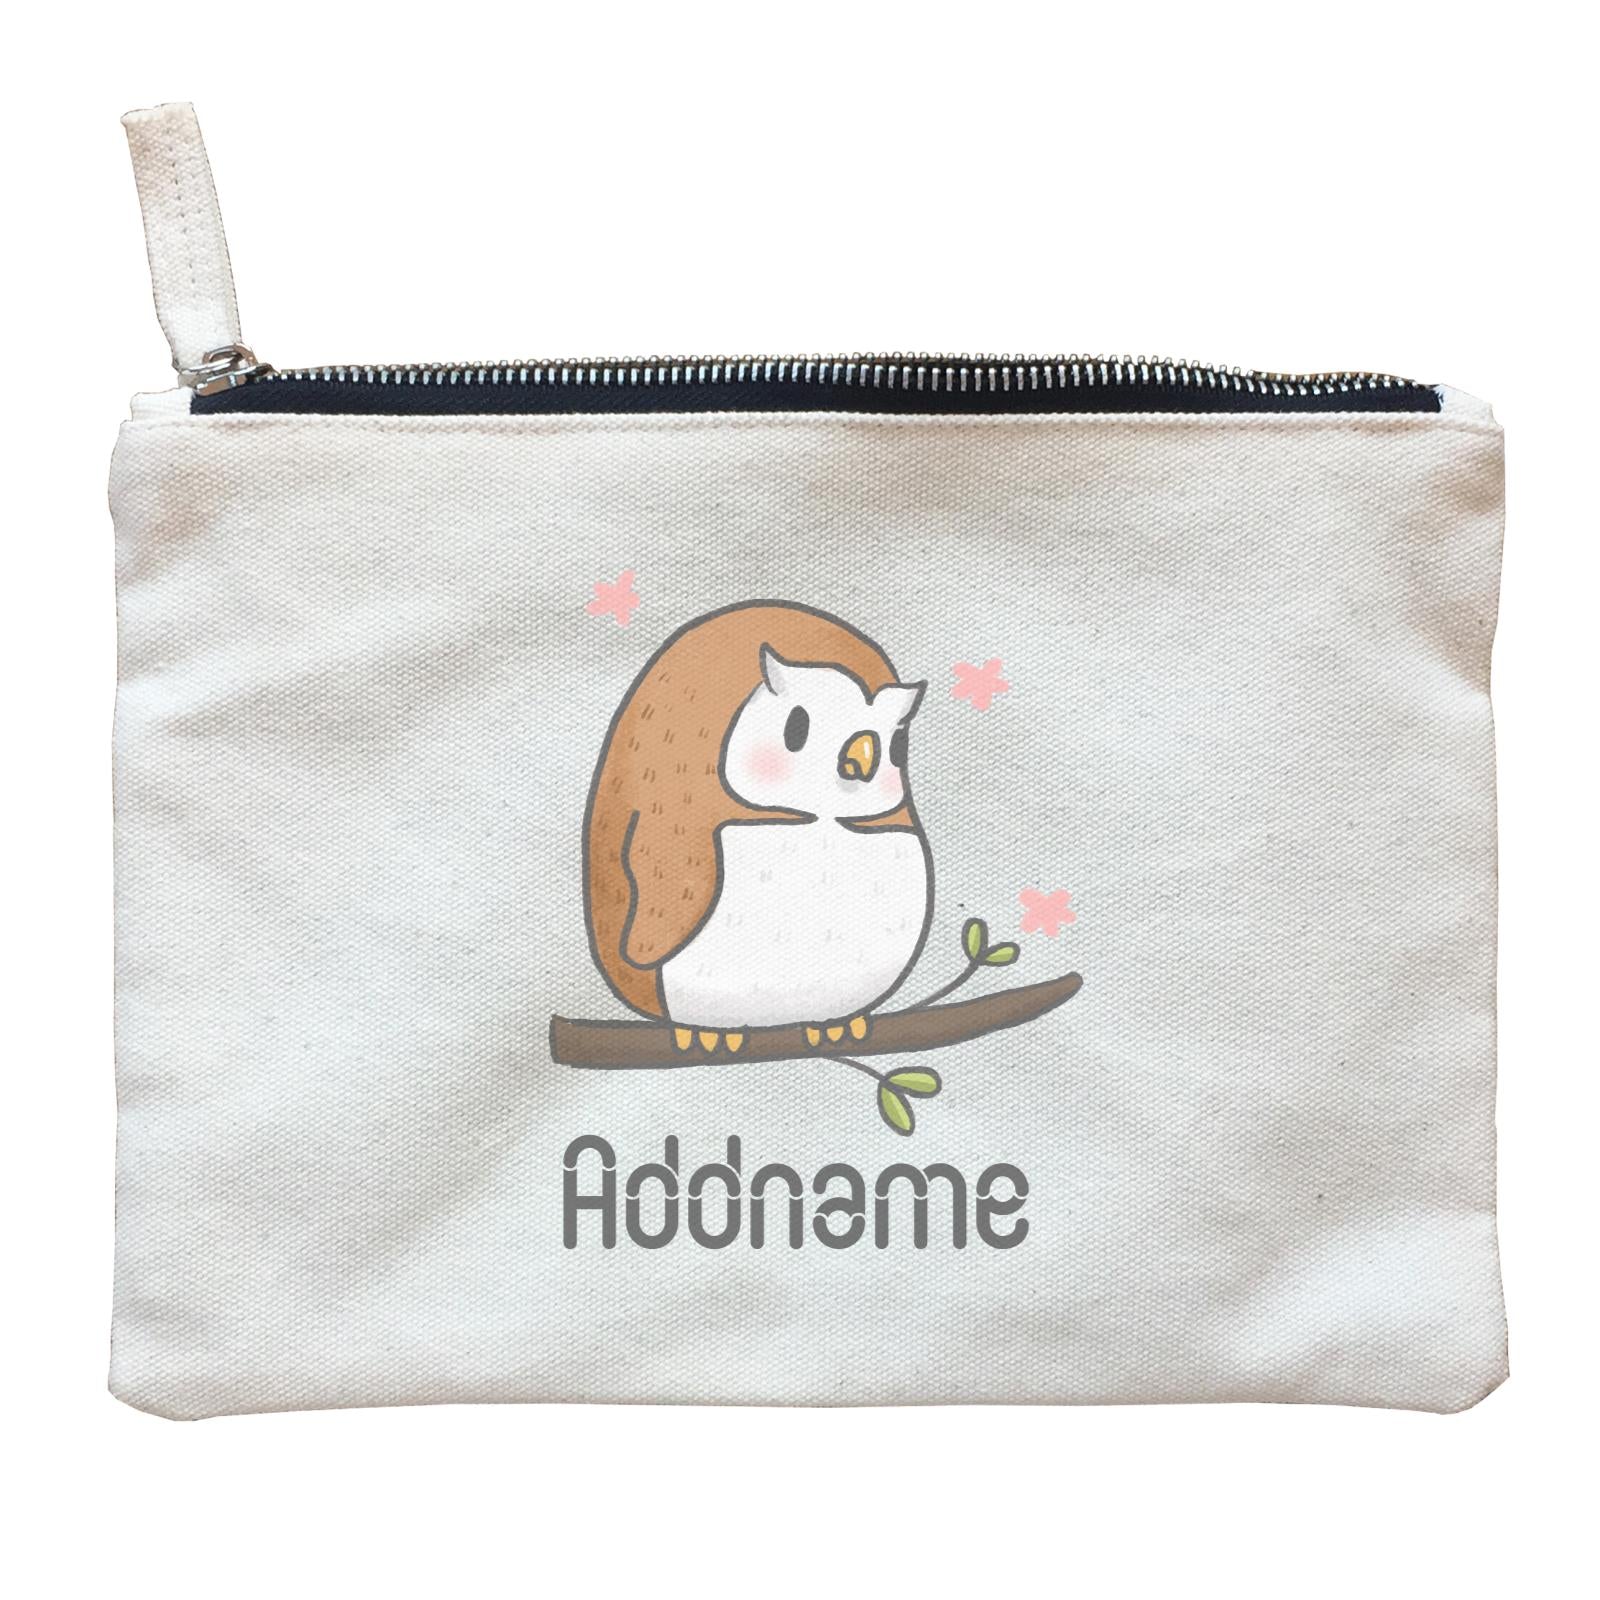 Cute Hand Drawn Style Owl Addname Zipper Pouch